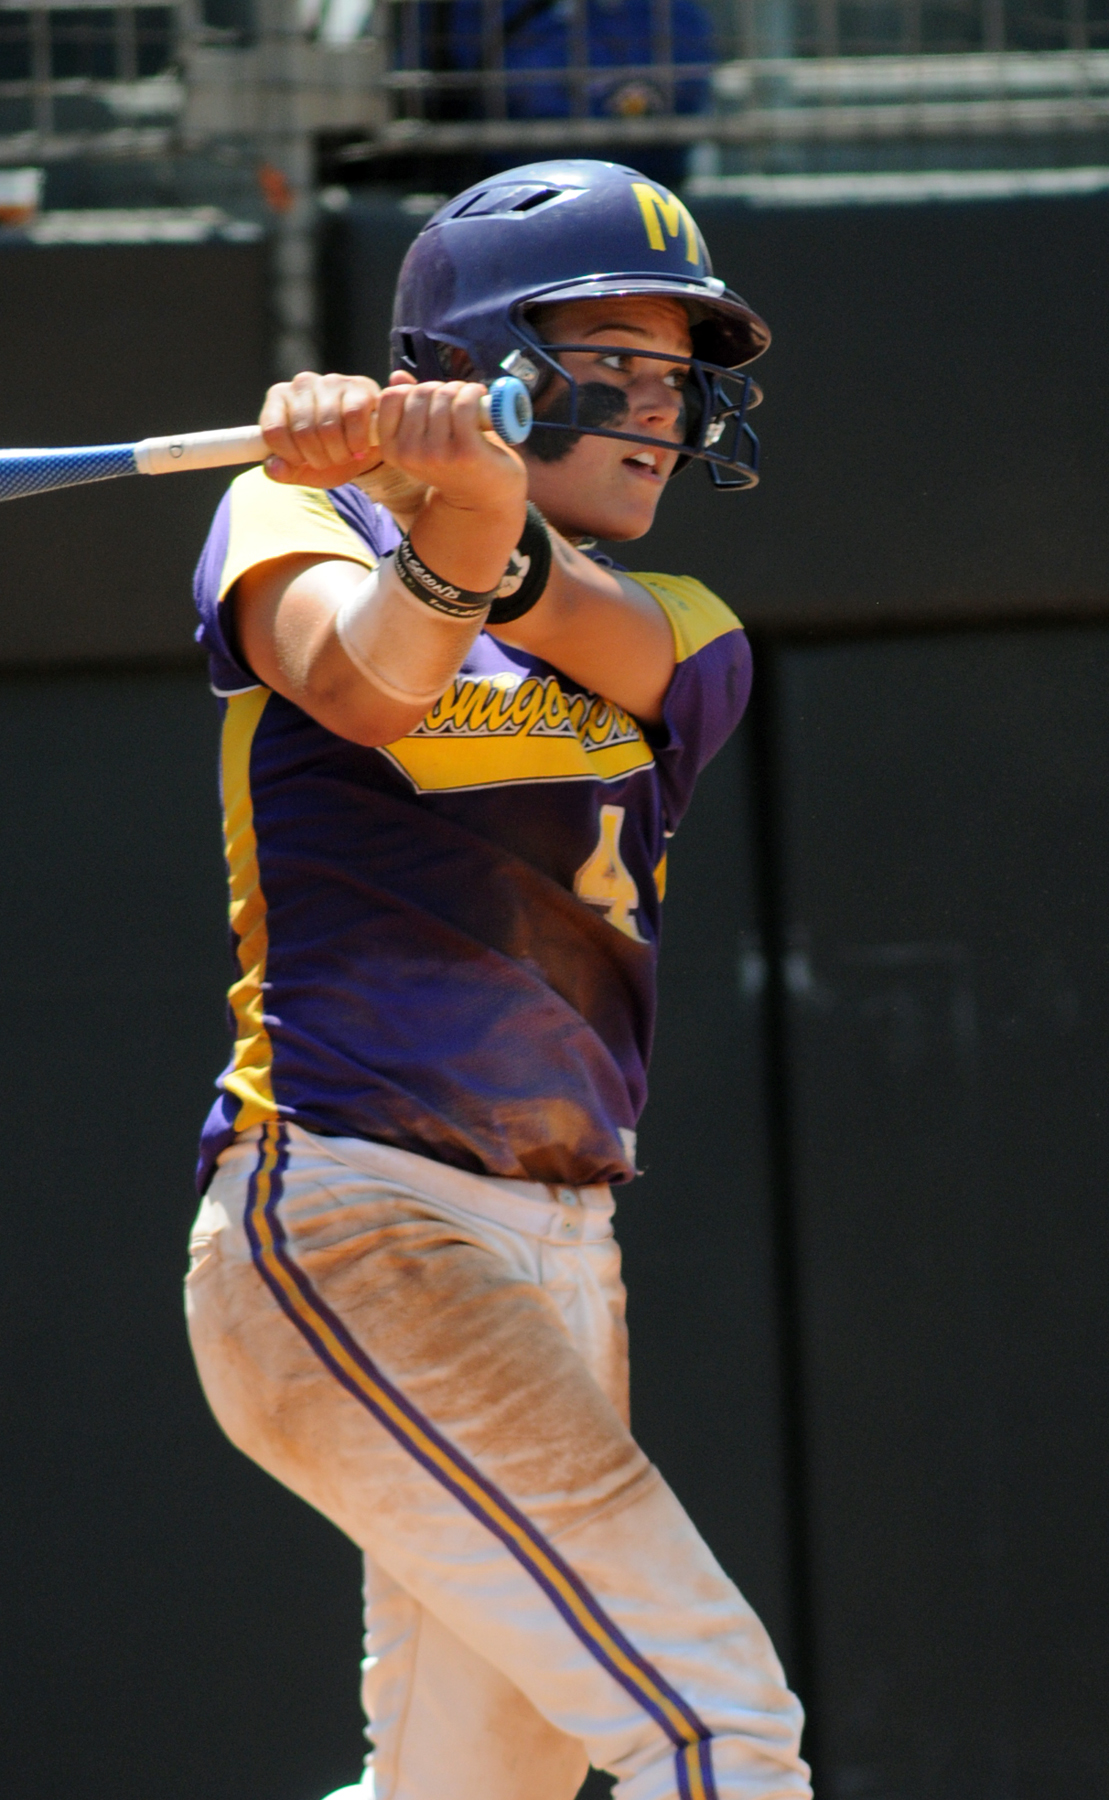 Montgomery falls just short in 4A state softball final - Houston Chronicle1109 x 1800